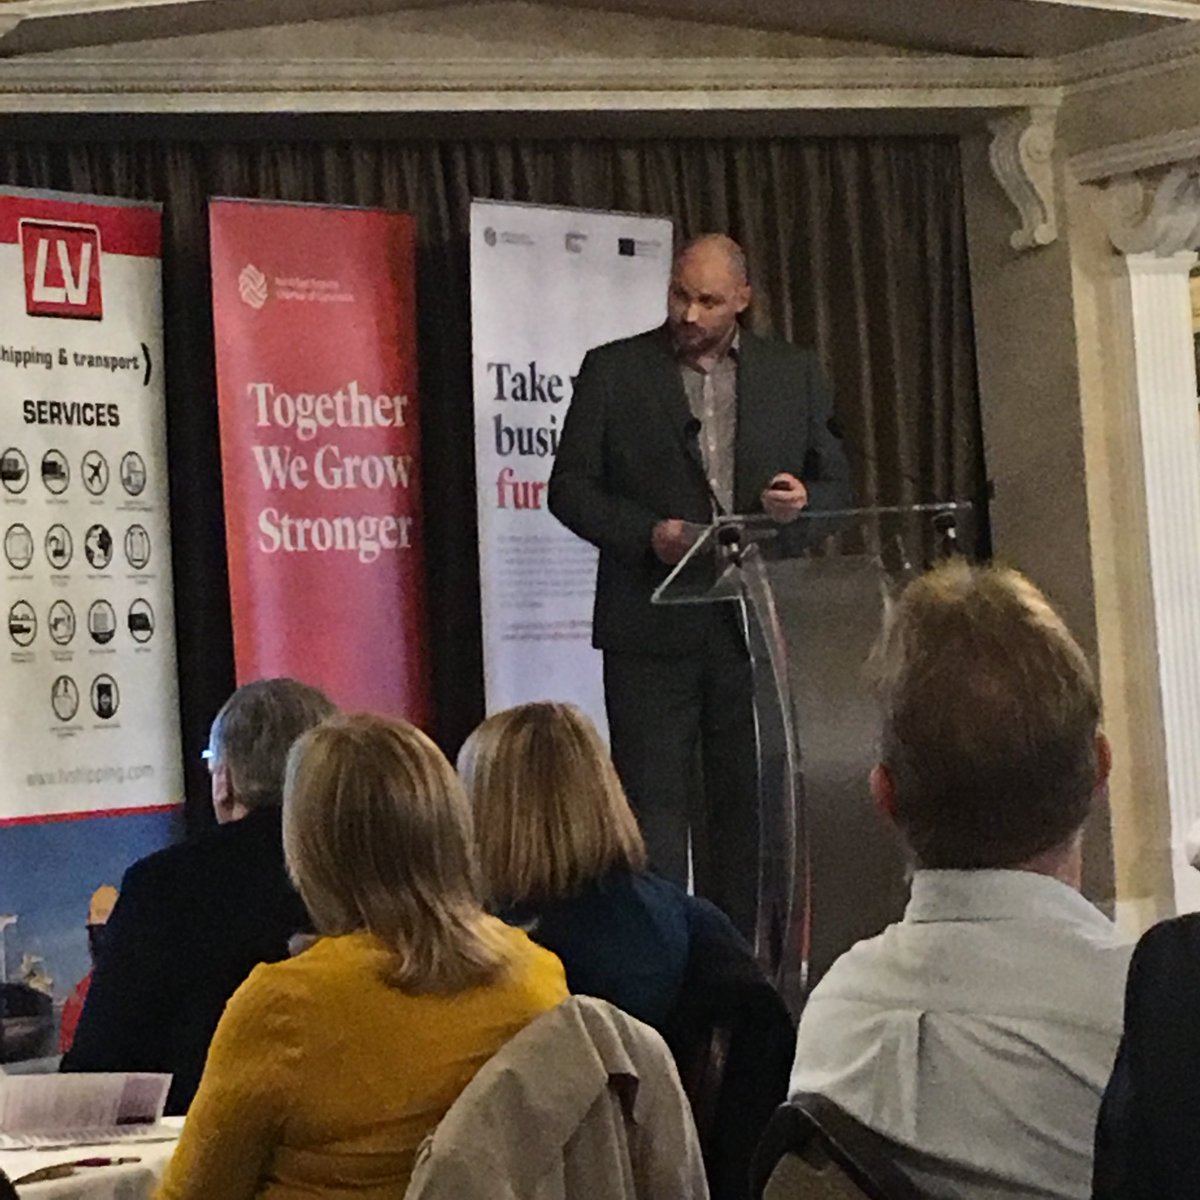 @MrMatthewOrd our Brand Ambassador speaking today @NEEChamberAsh members’ highlighting the many services we offer across the LV GROUP #transport #logistics @Ramside_Hall #NEEChamberevents #growyourreach